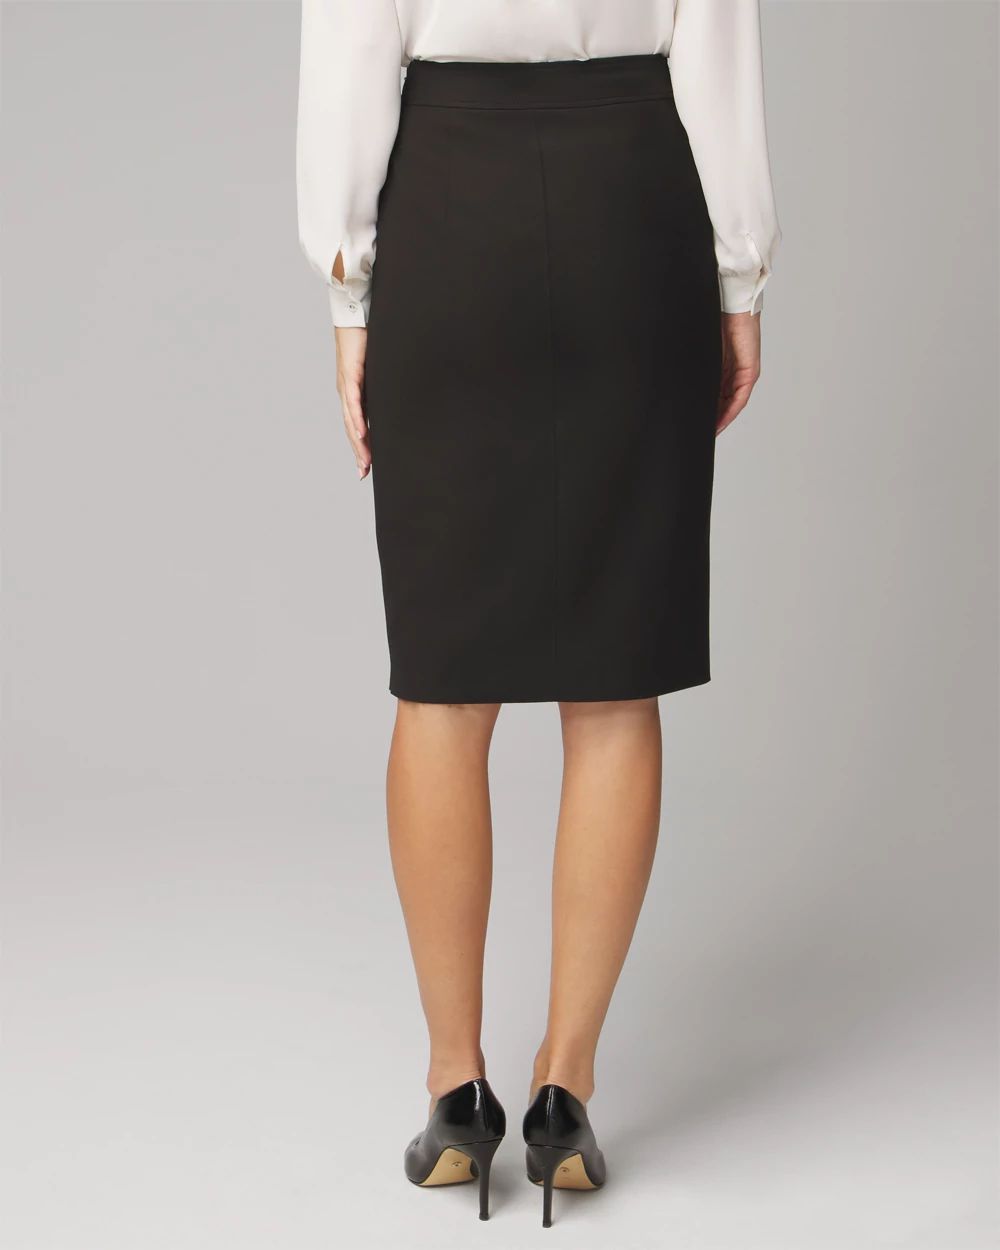 Comfort Stretch Pencil Skirt click to view larger image.